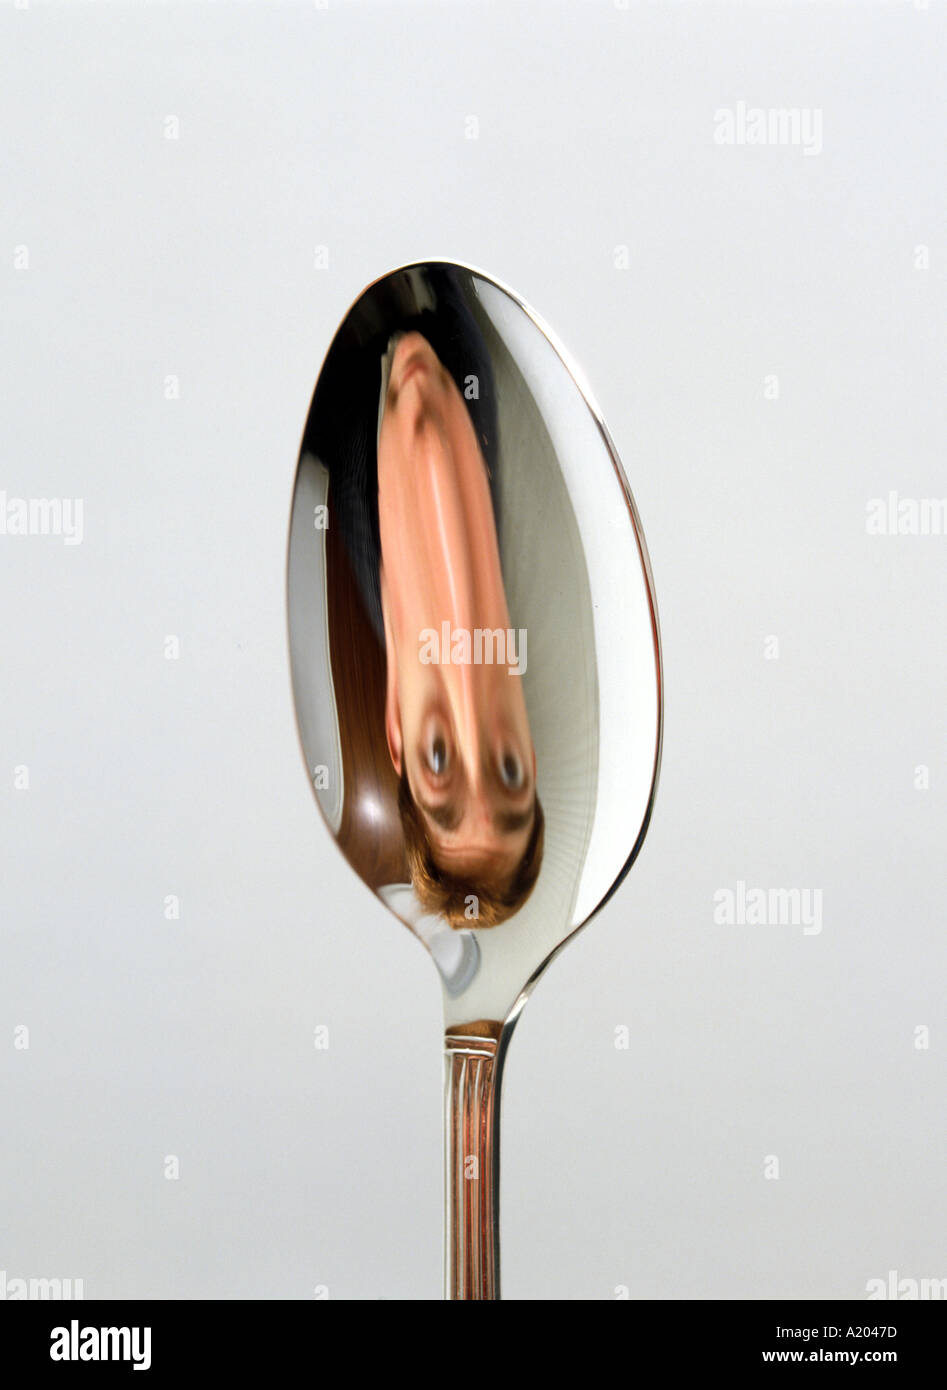 reflection in the concave side of a spoon image inverted upside down Stock Photo